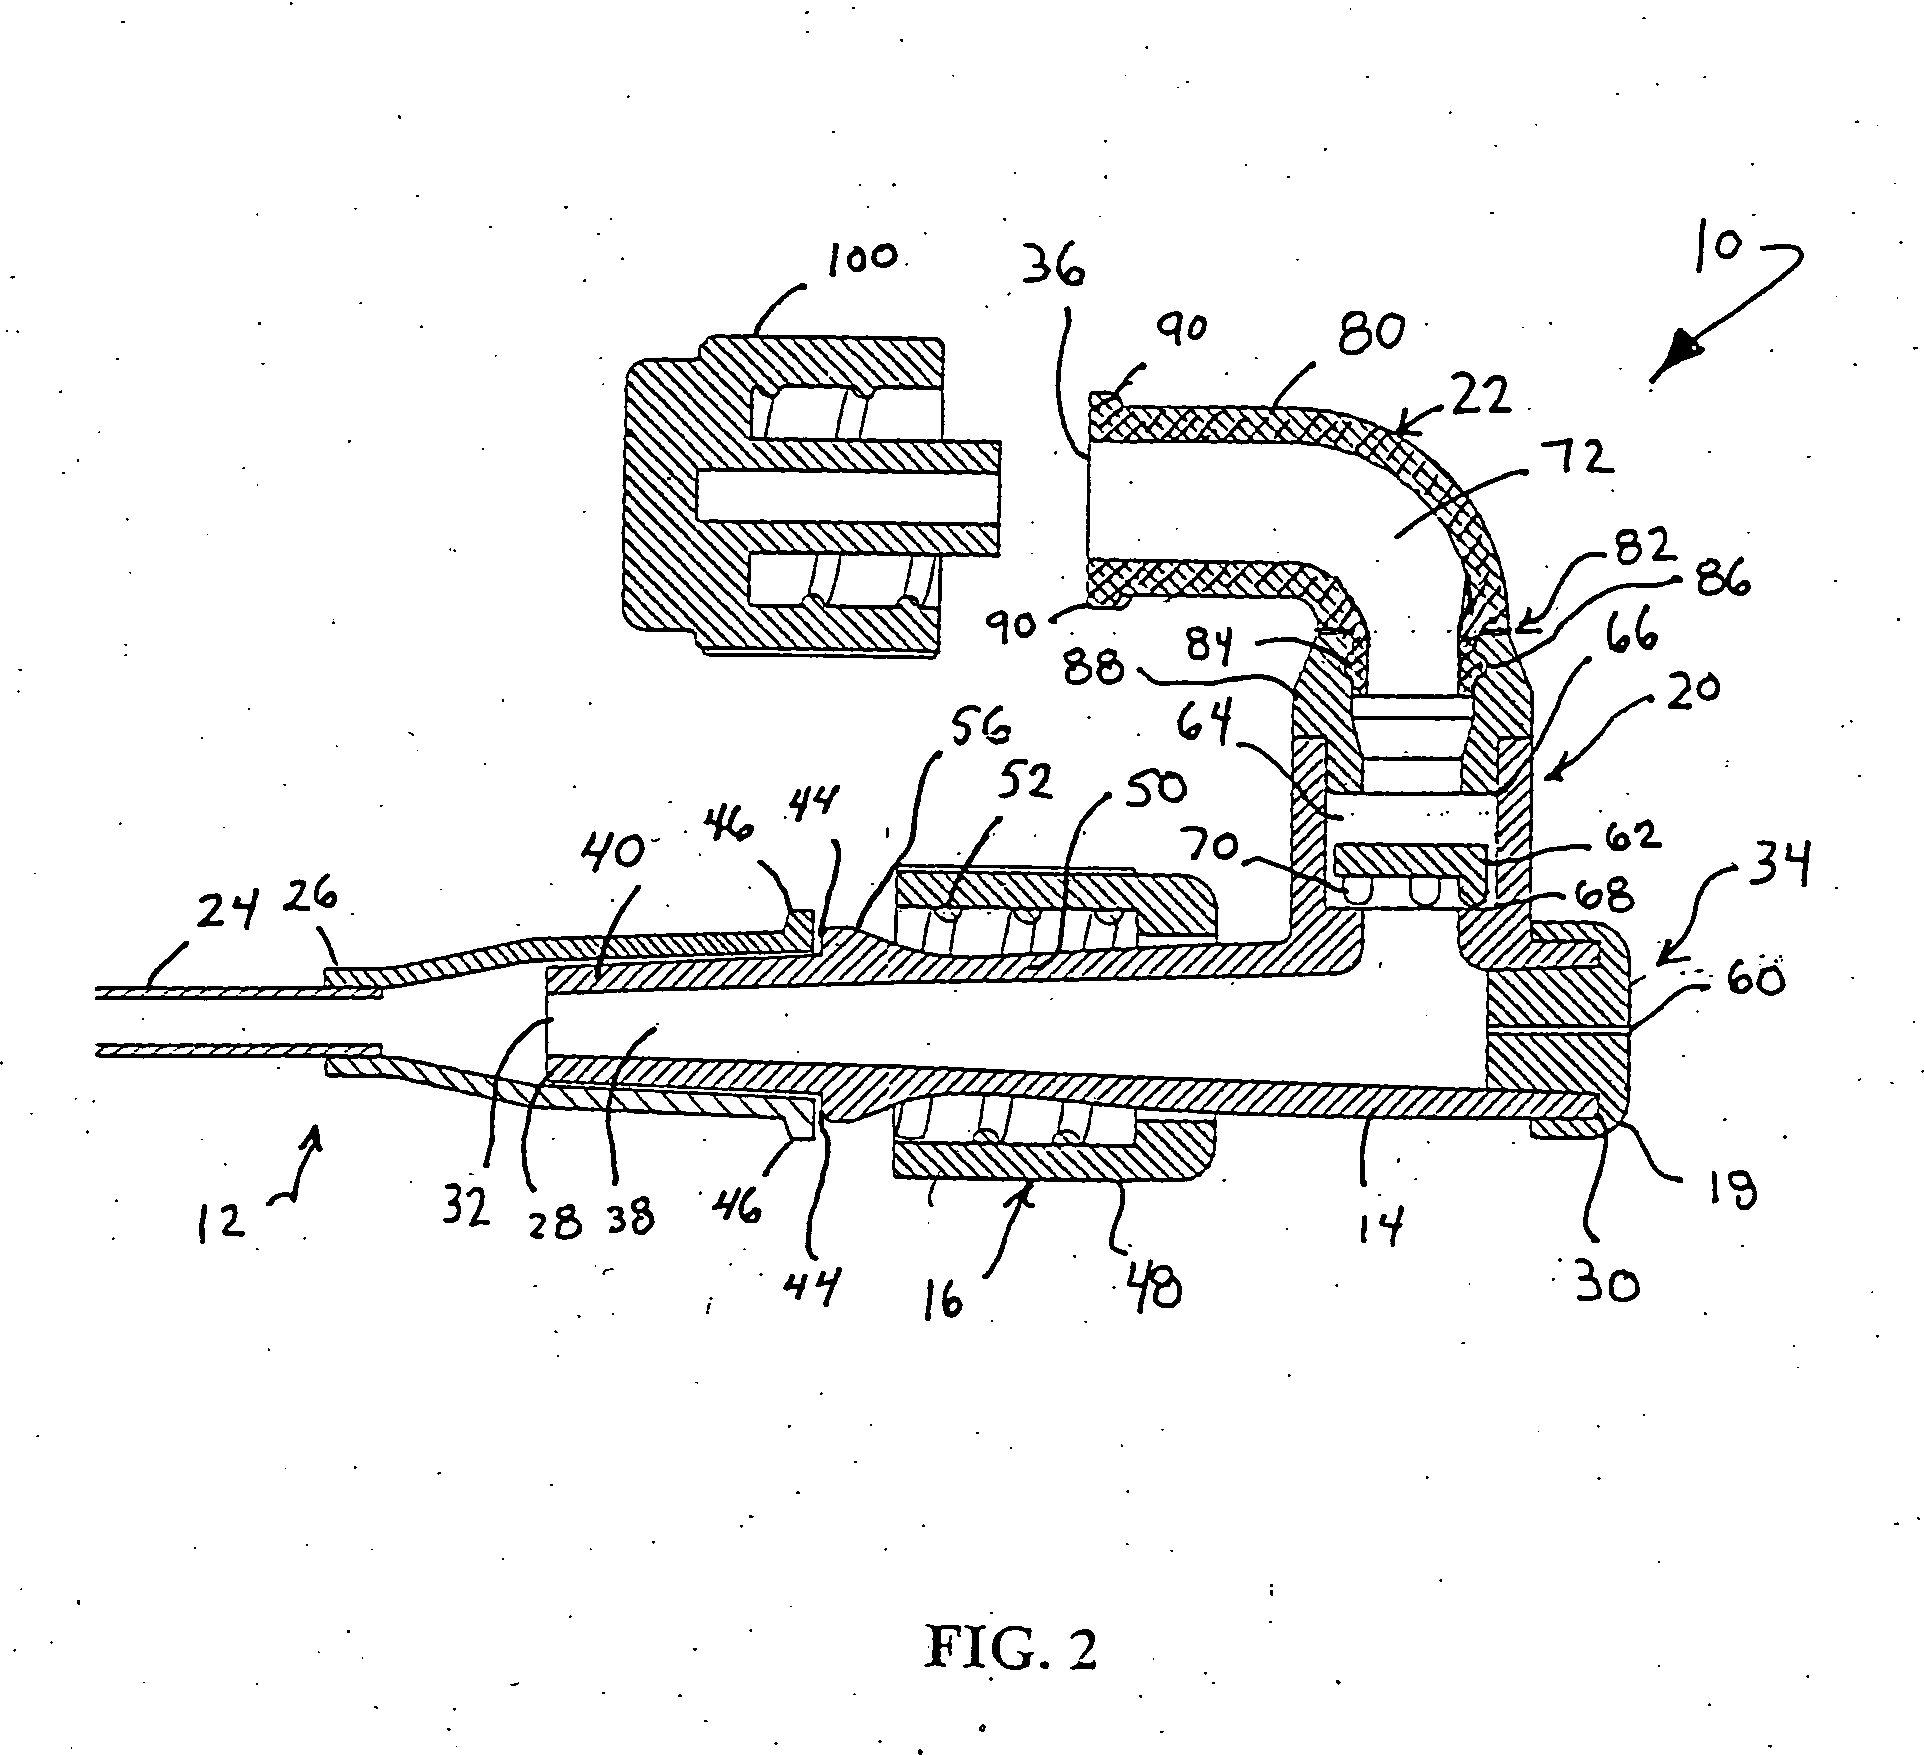 Vascular access device and method of using same